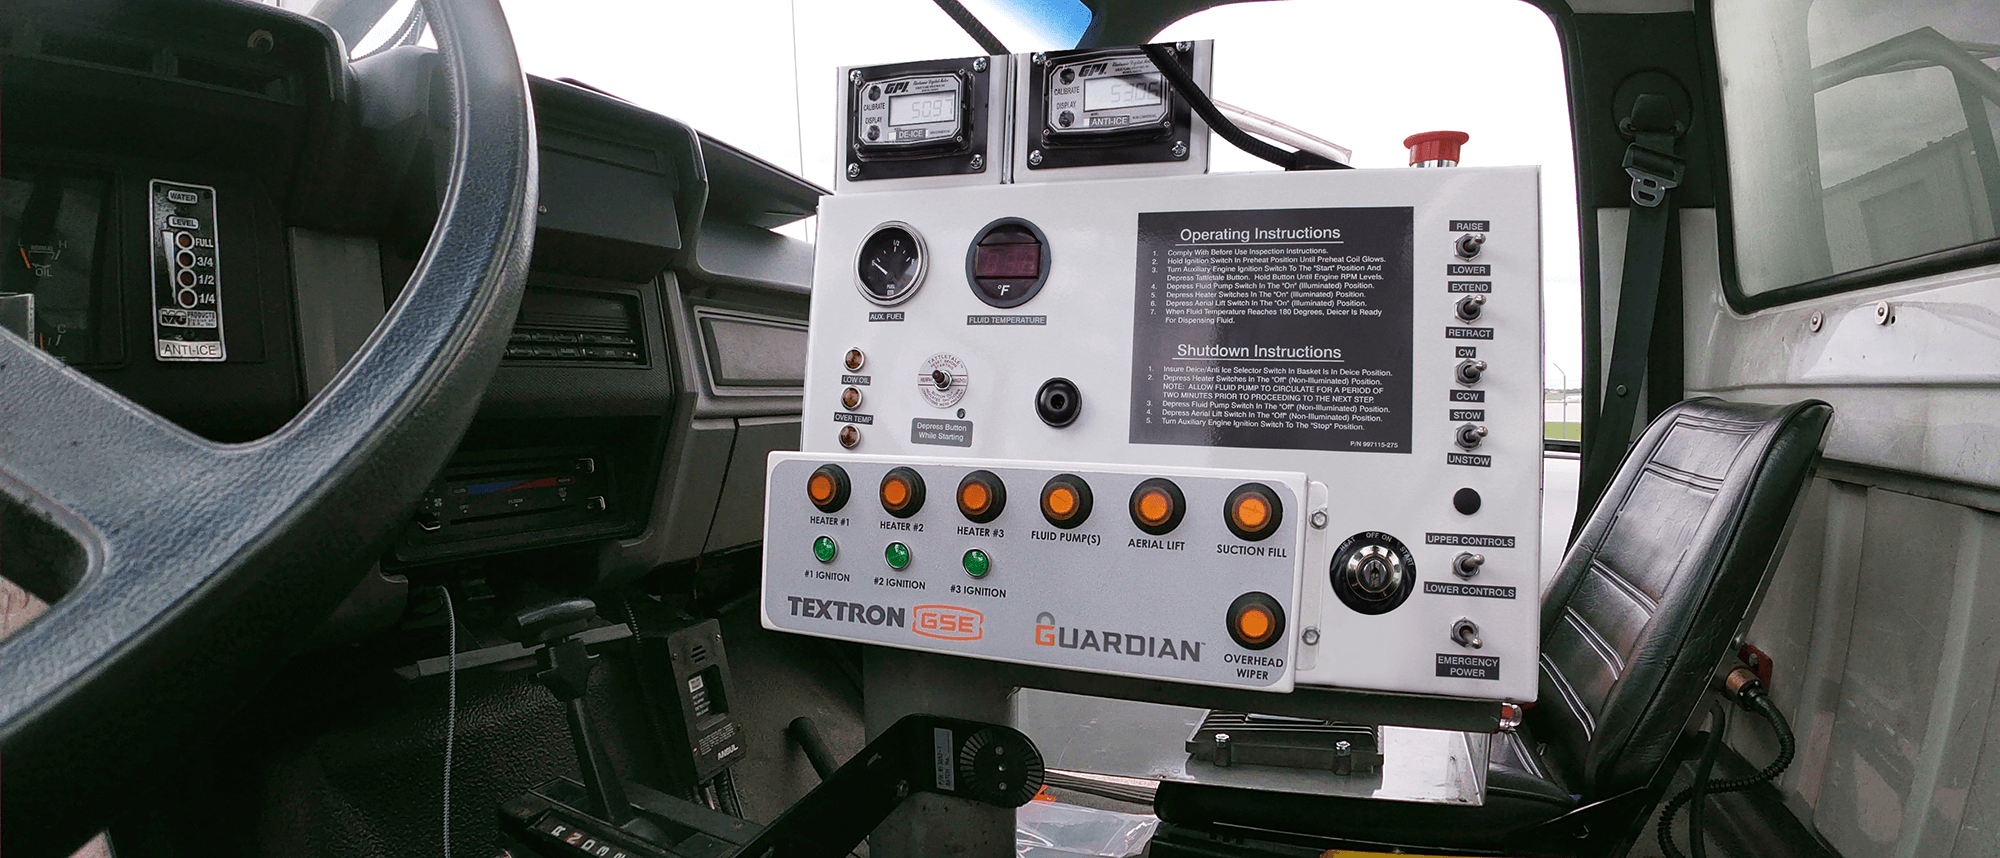 Guardian Technology is offered exclusively for Textron GSE Premier Deicer Trucks.